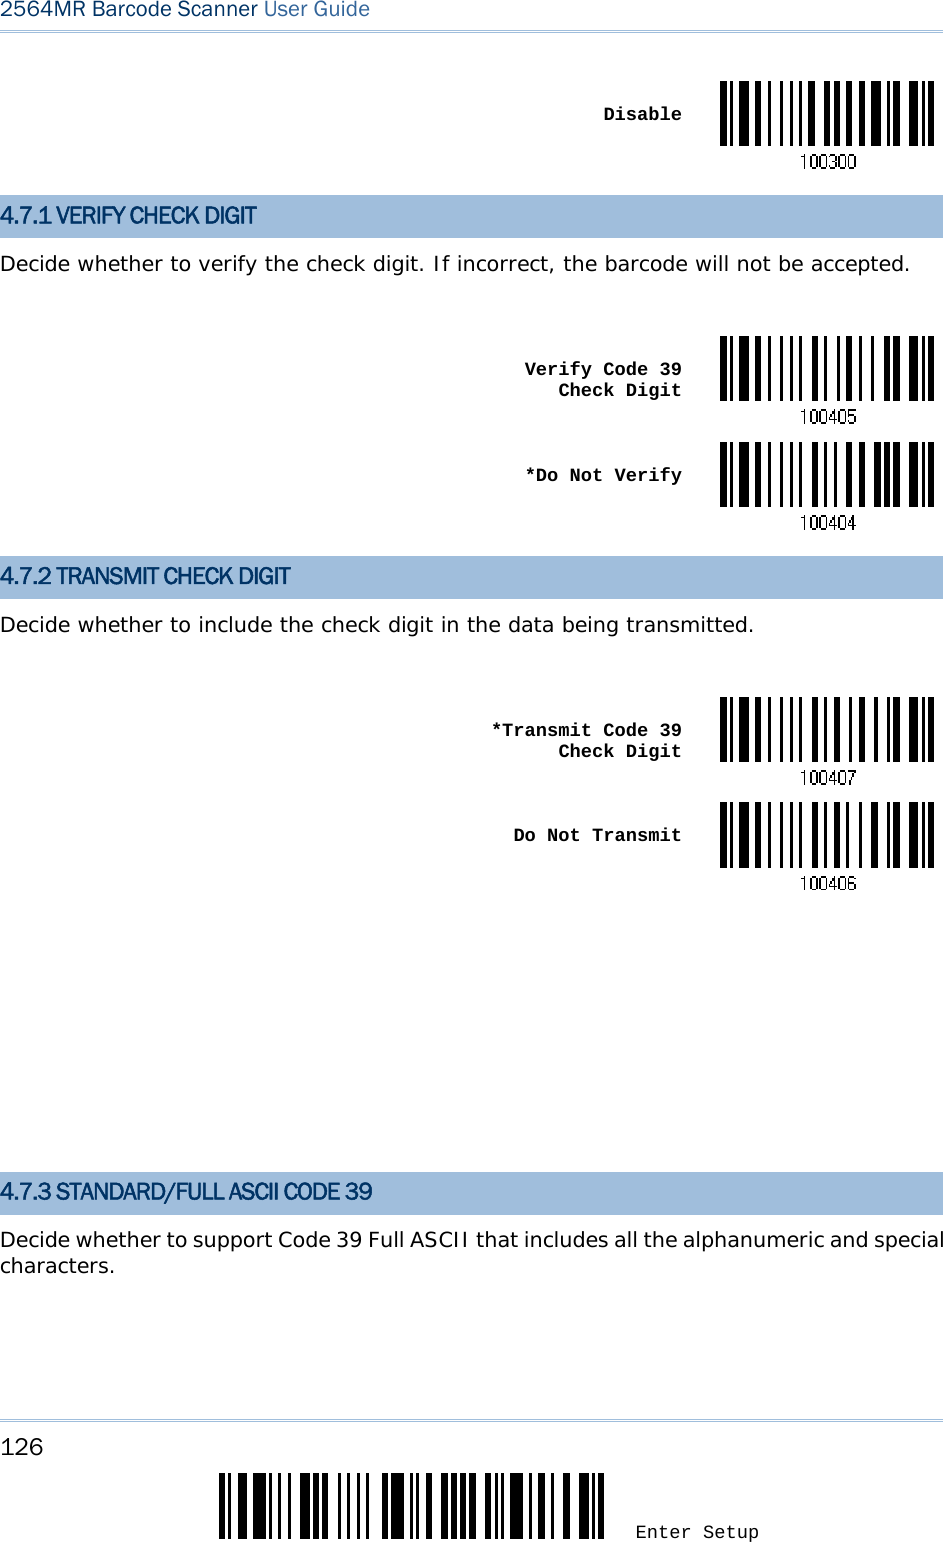 126 Enter Setup 2564MR Barcode Scanner User Guide   Disable4.7.1 VERIFY CHECK DIGIT Decide whether to verify the check digit. If incorrect, the barcode will not be accepted.   Verify Code 39  Check Digit *Do Not Verify4.7.2 TRANSMIT CHECK DIGIT Decide whether to include the check digit in the data being transmitted.   *Transmit Code 39 Check Digit Do Not Transmit            4.7.3 STANDARD/FULL ASCII CODE 39 Decide whether to support Code 39 Full ASCII that includes all the alphanumeric and special characters.  